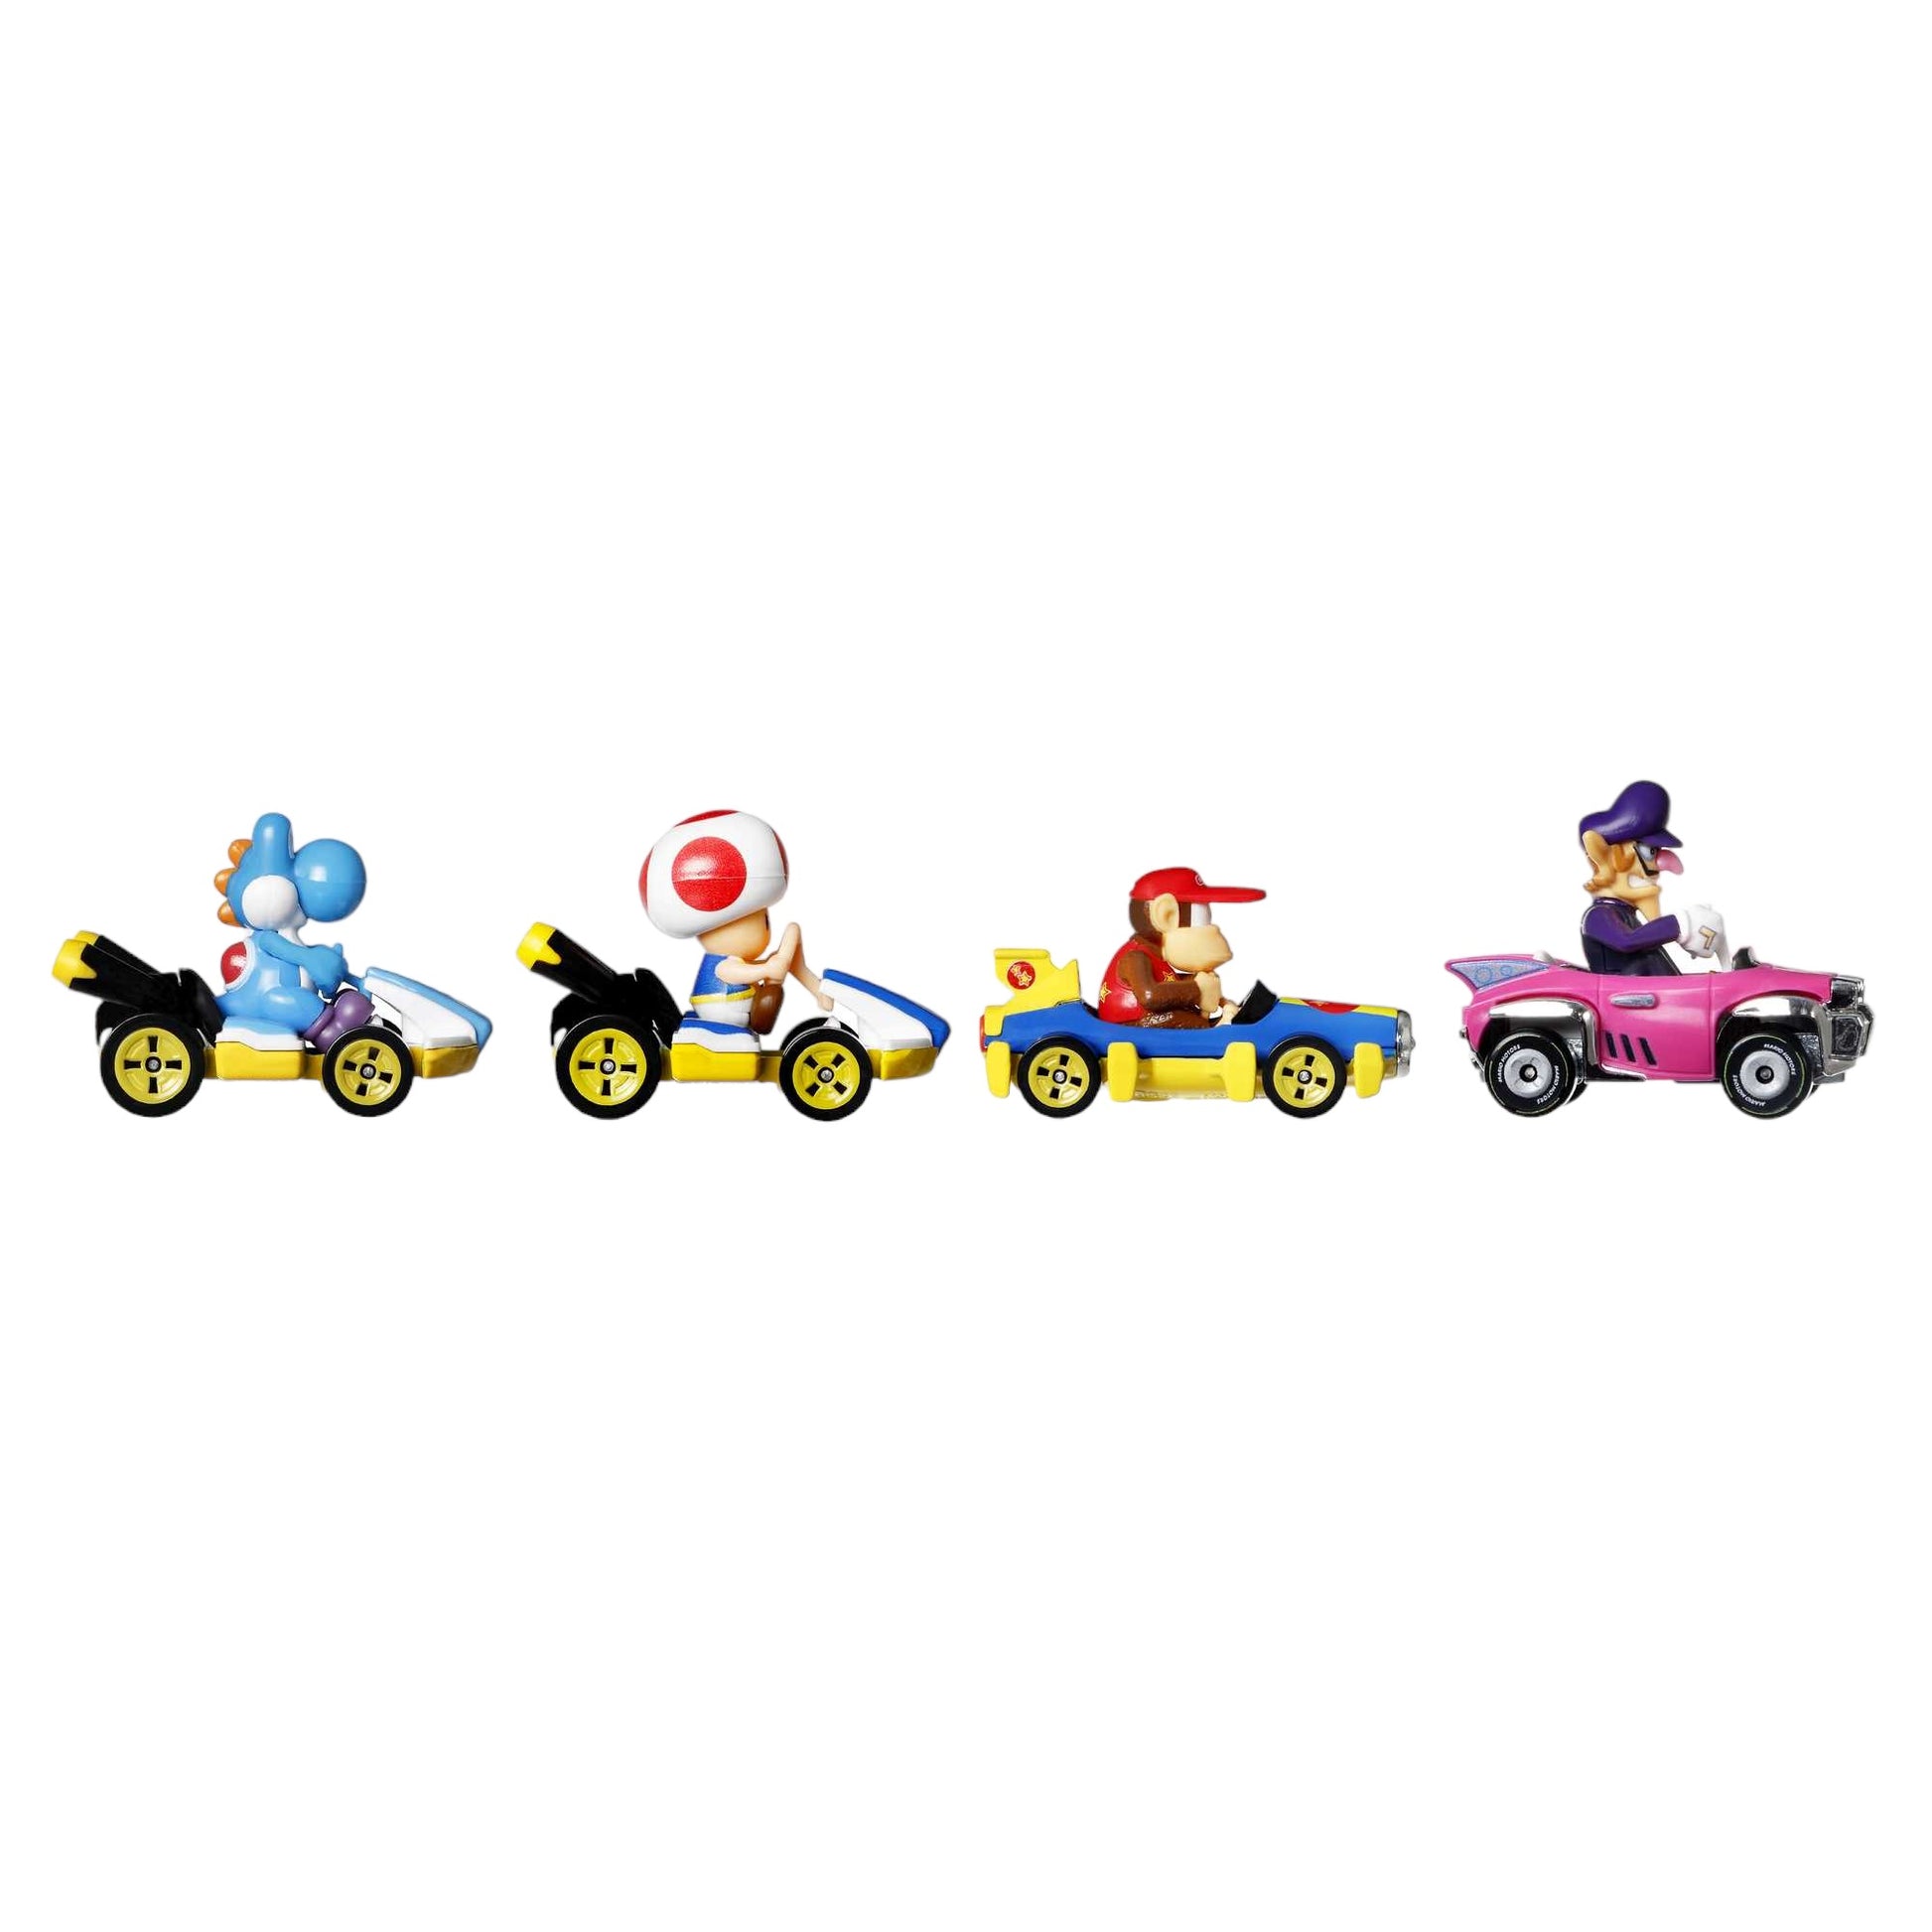 Mario Kart Vehicle 4-Pack, Set Of 4 Fan-Favorite Characters Includes 1 Exclusive Model